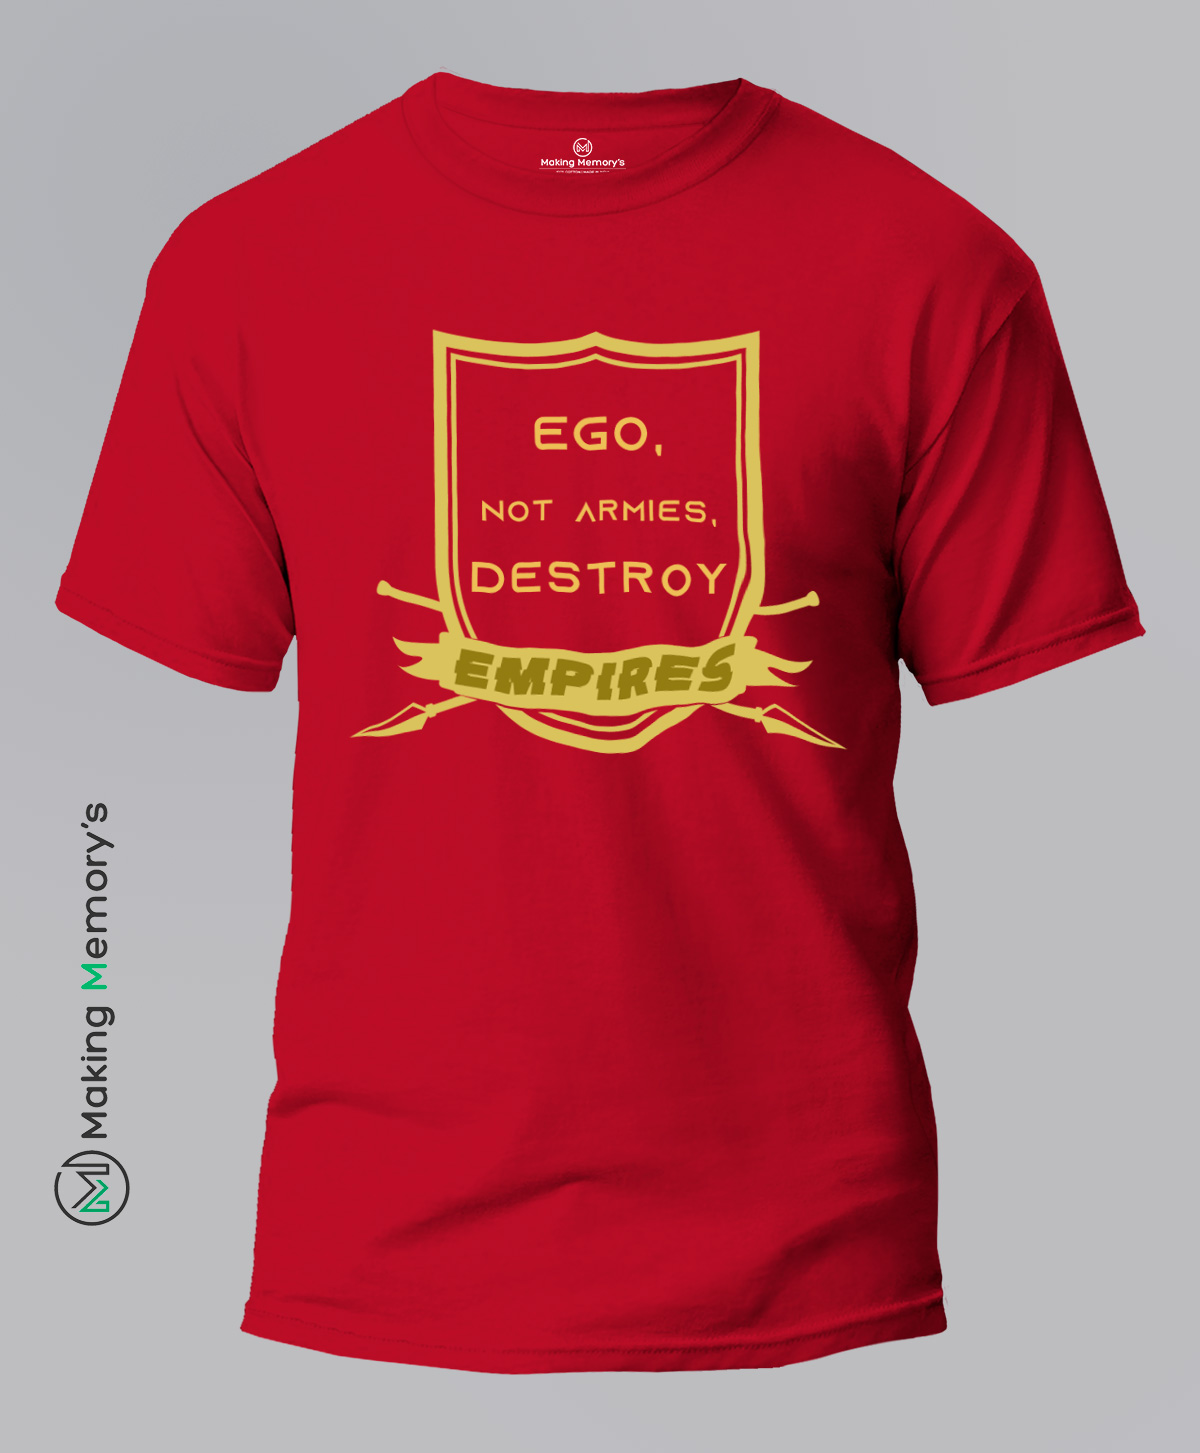 Ego,-Not-Armies,-Destroy-Empires-Red-T-Shirt